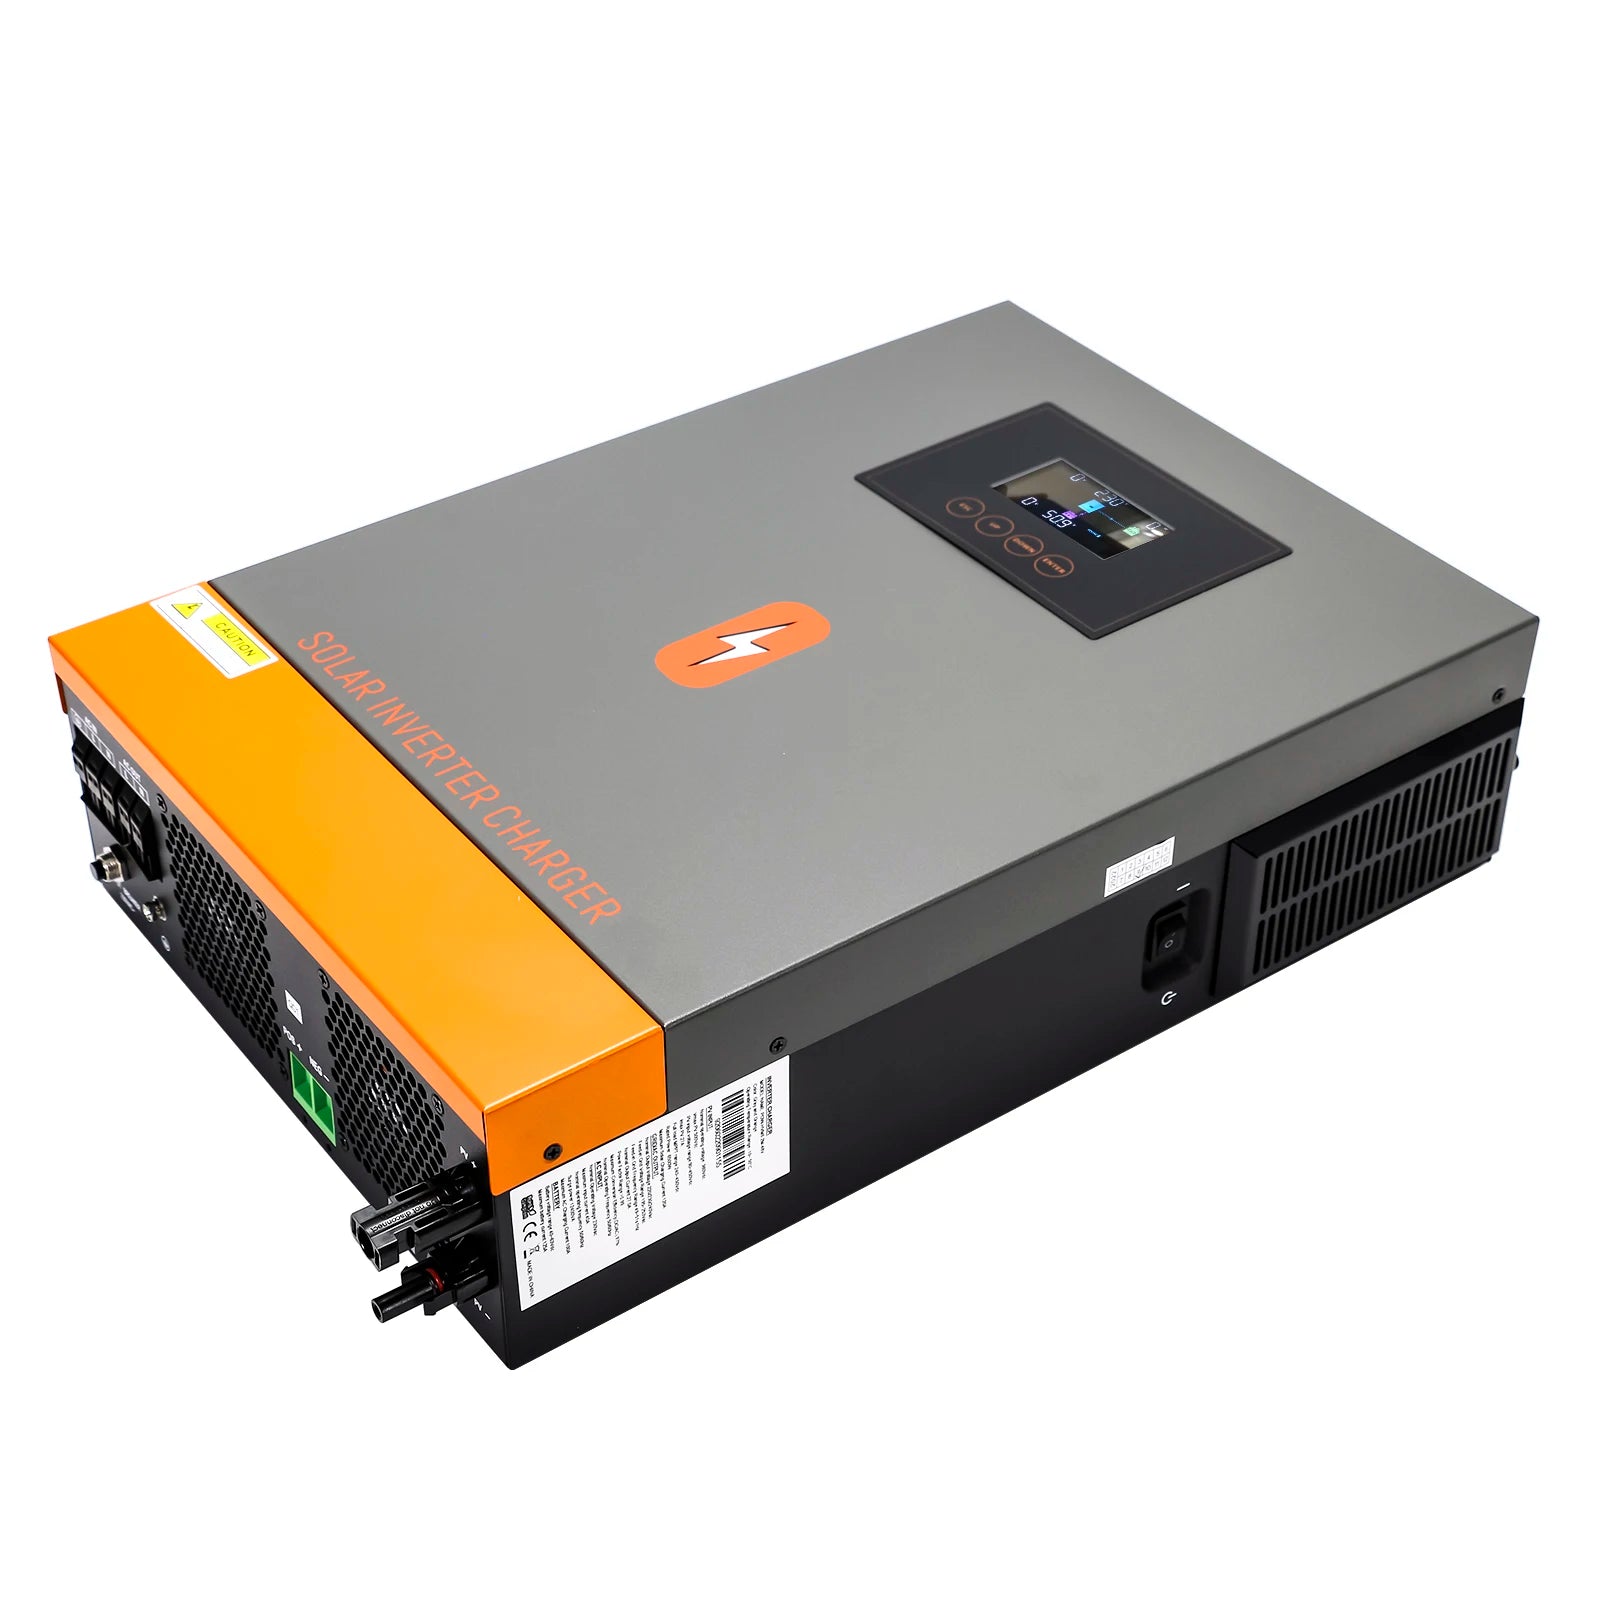 PowMr 6200W Grid Tied Inverter, Inverter with MPPT solar charge controller for grid-tied systems, handles up to 500VDC input, 230VAC output.